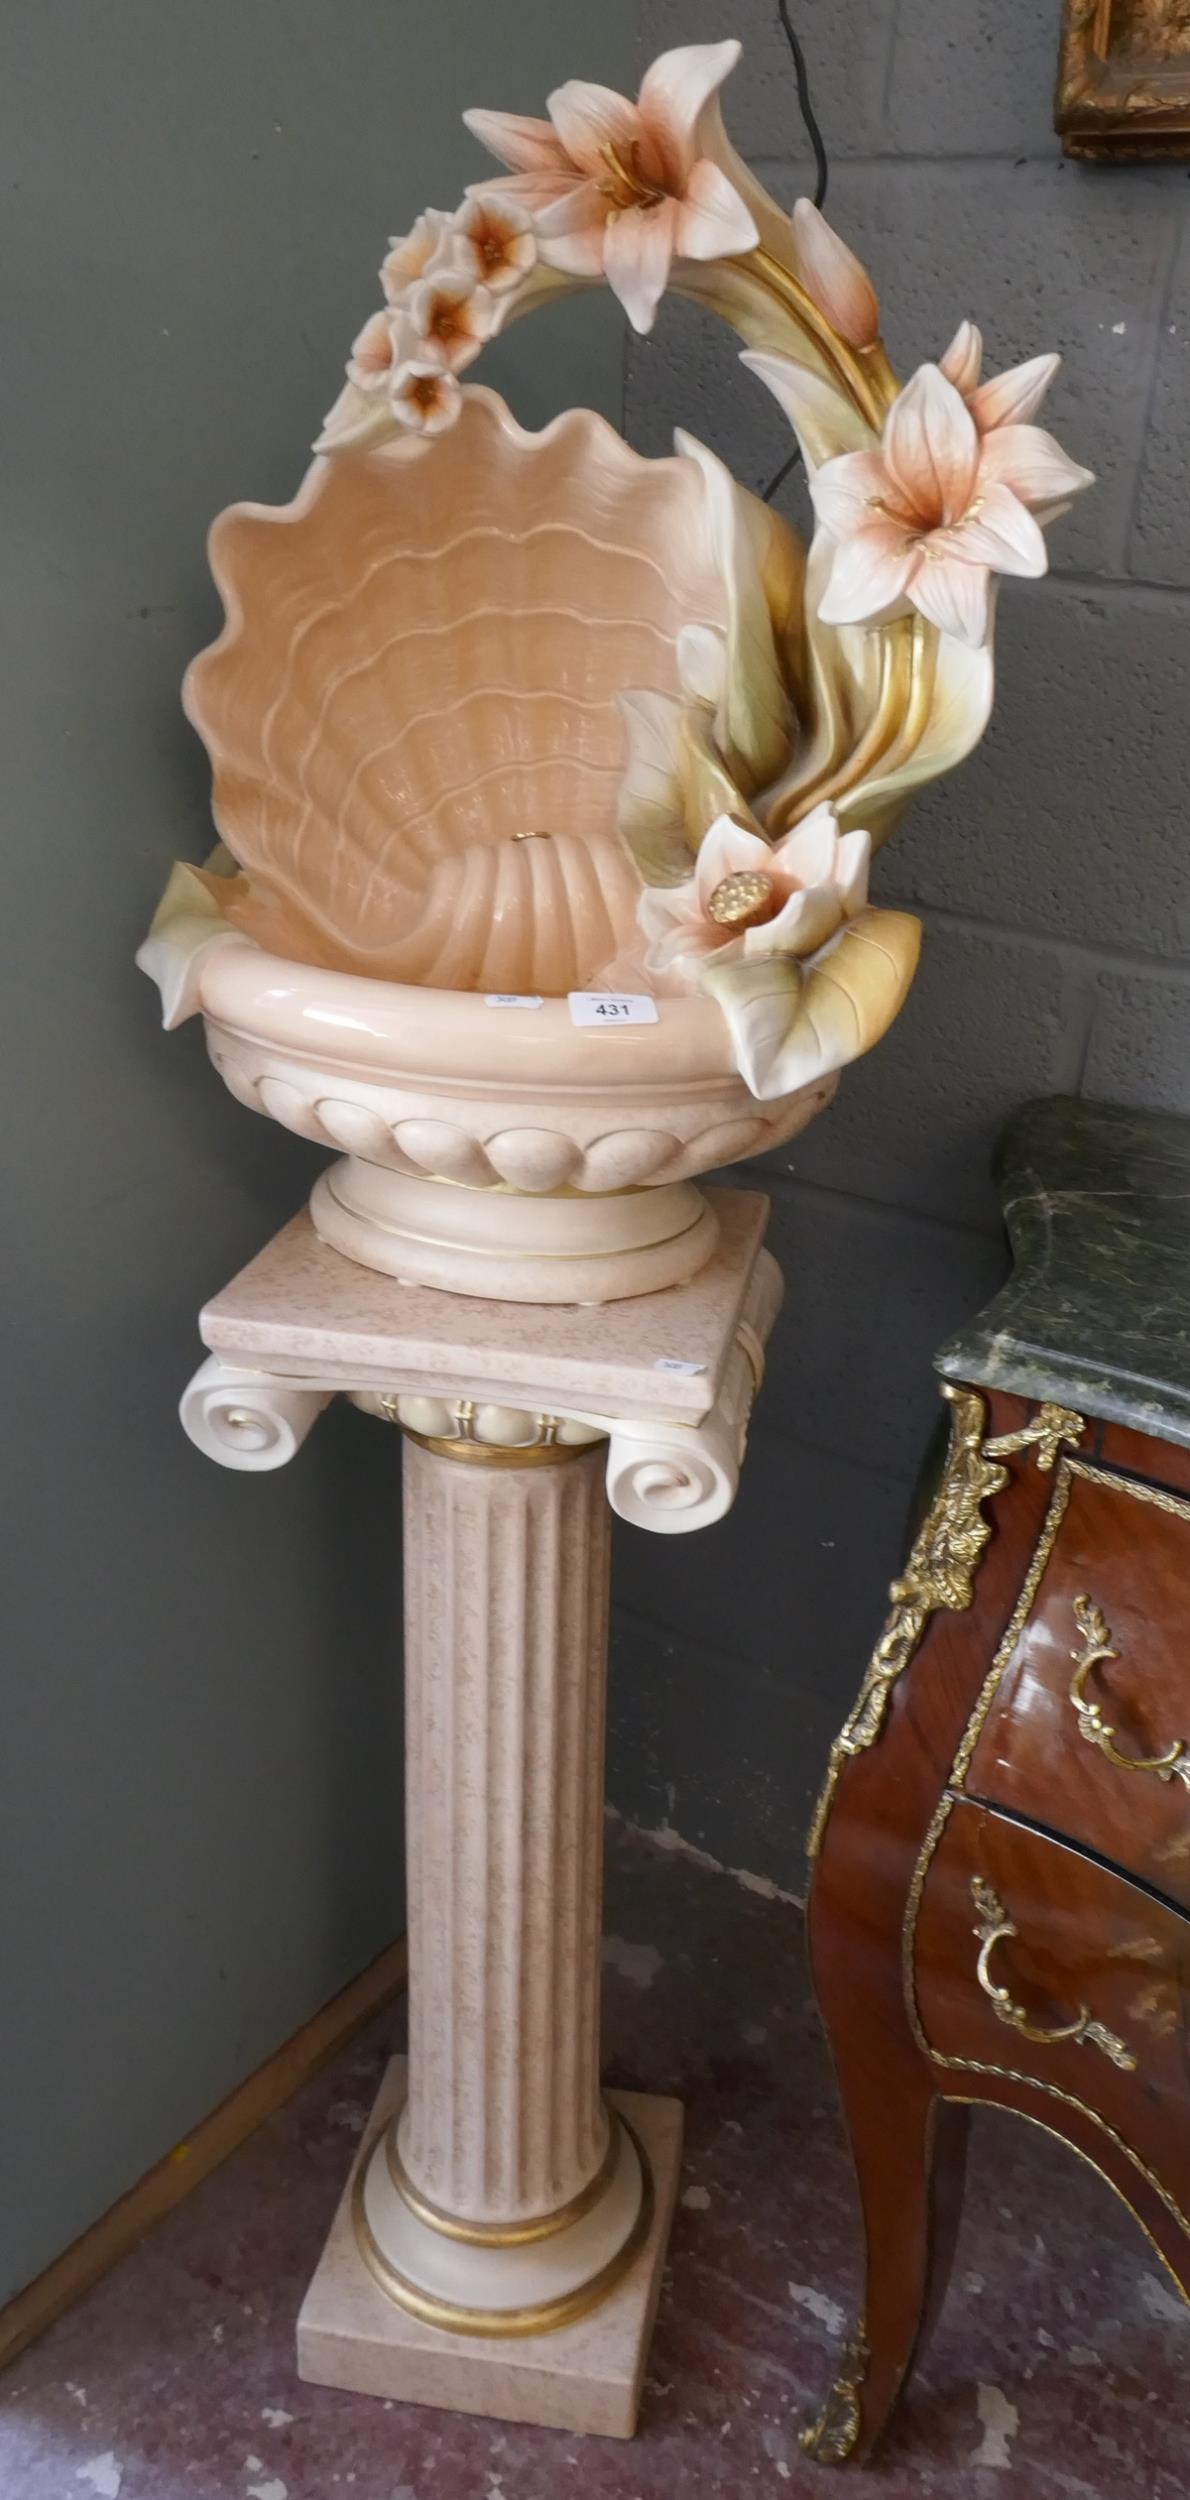 Decorative water feature on pedestal base in working order - Approx. height: 137cm